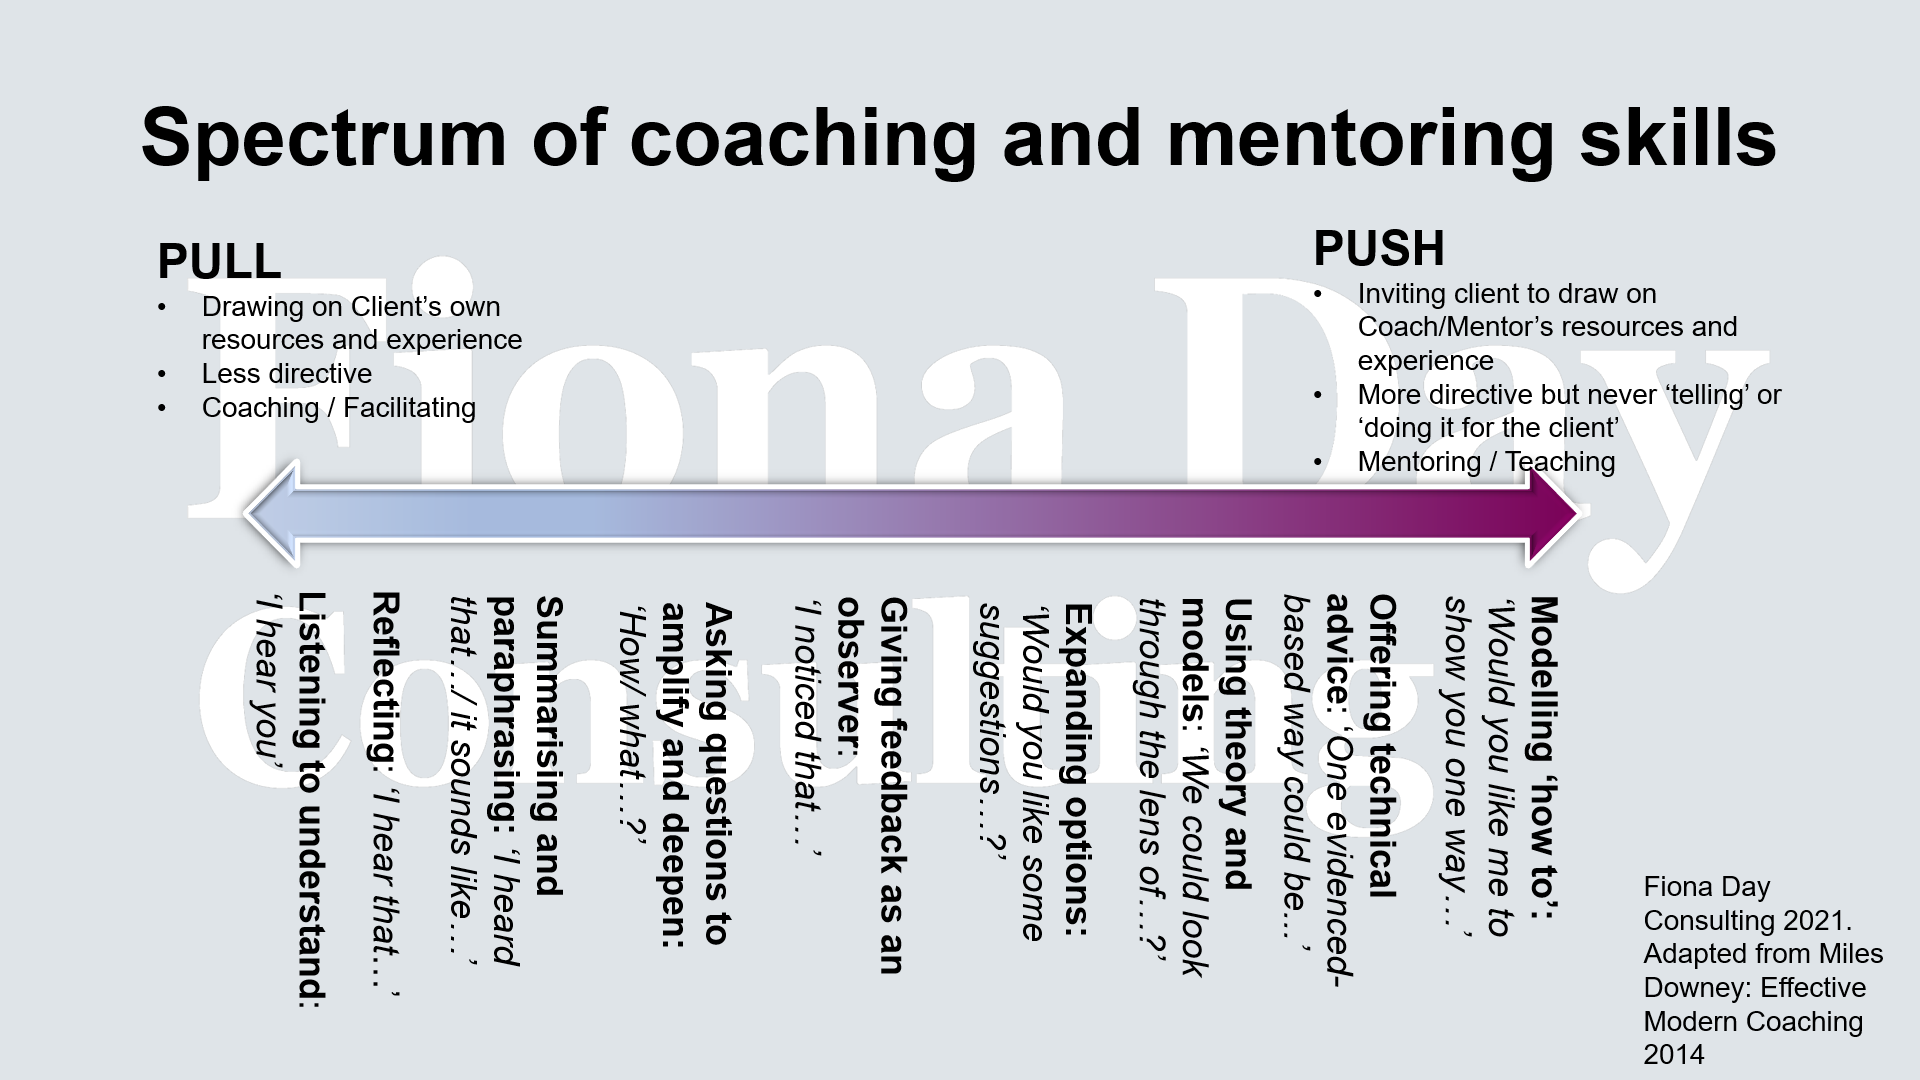 Spectrum of coaching and mentoring skills